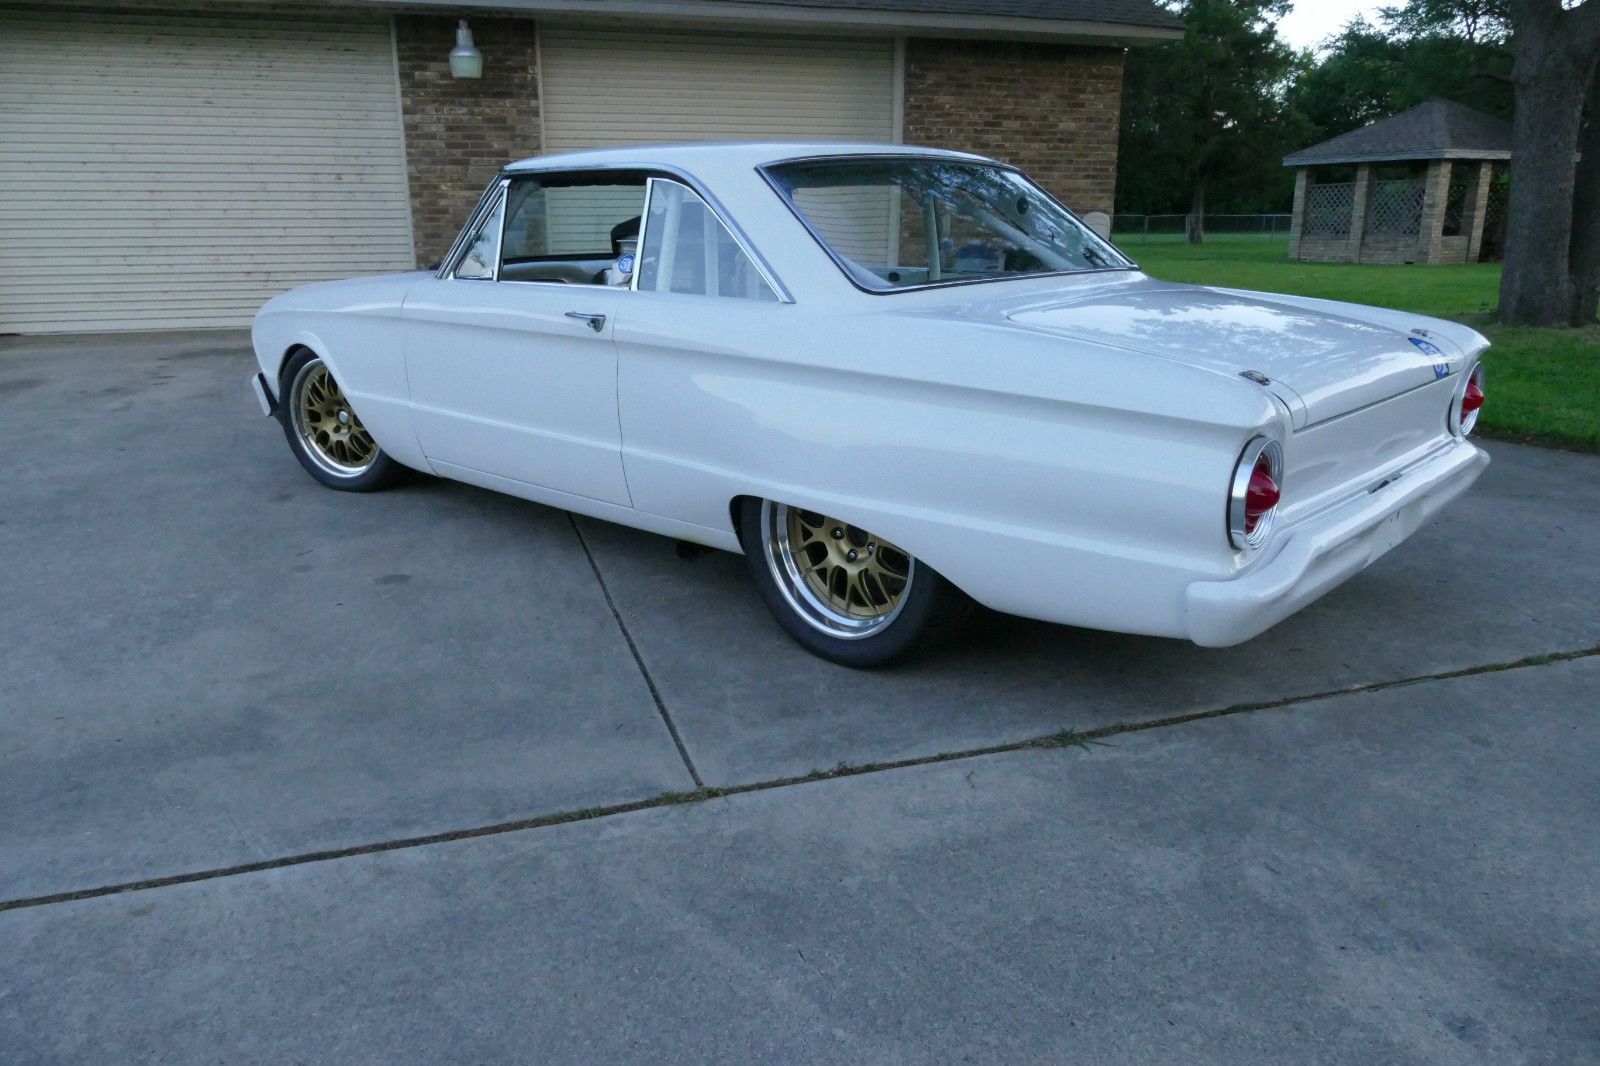 Aaron Kaufman's 1963 Ford Falcon Race car - he sold it for $65,000